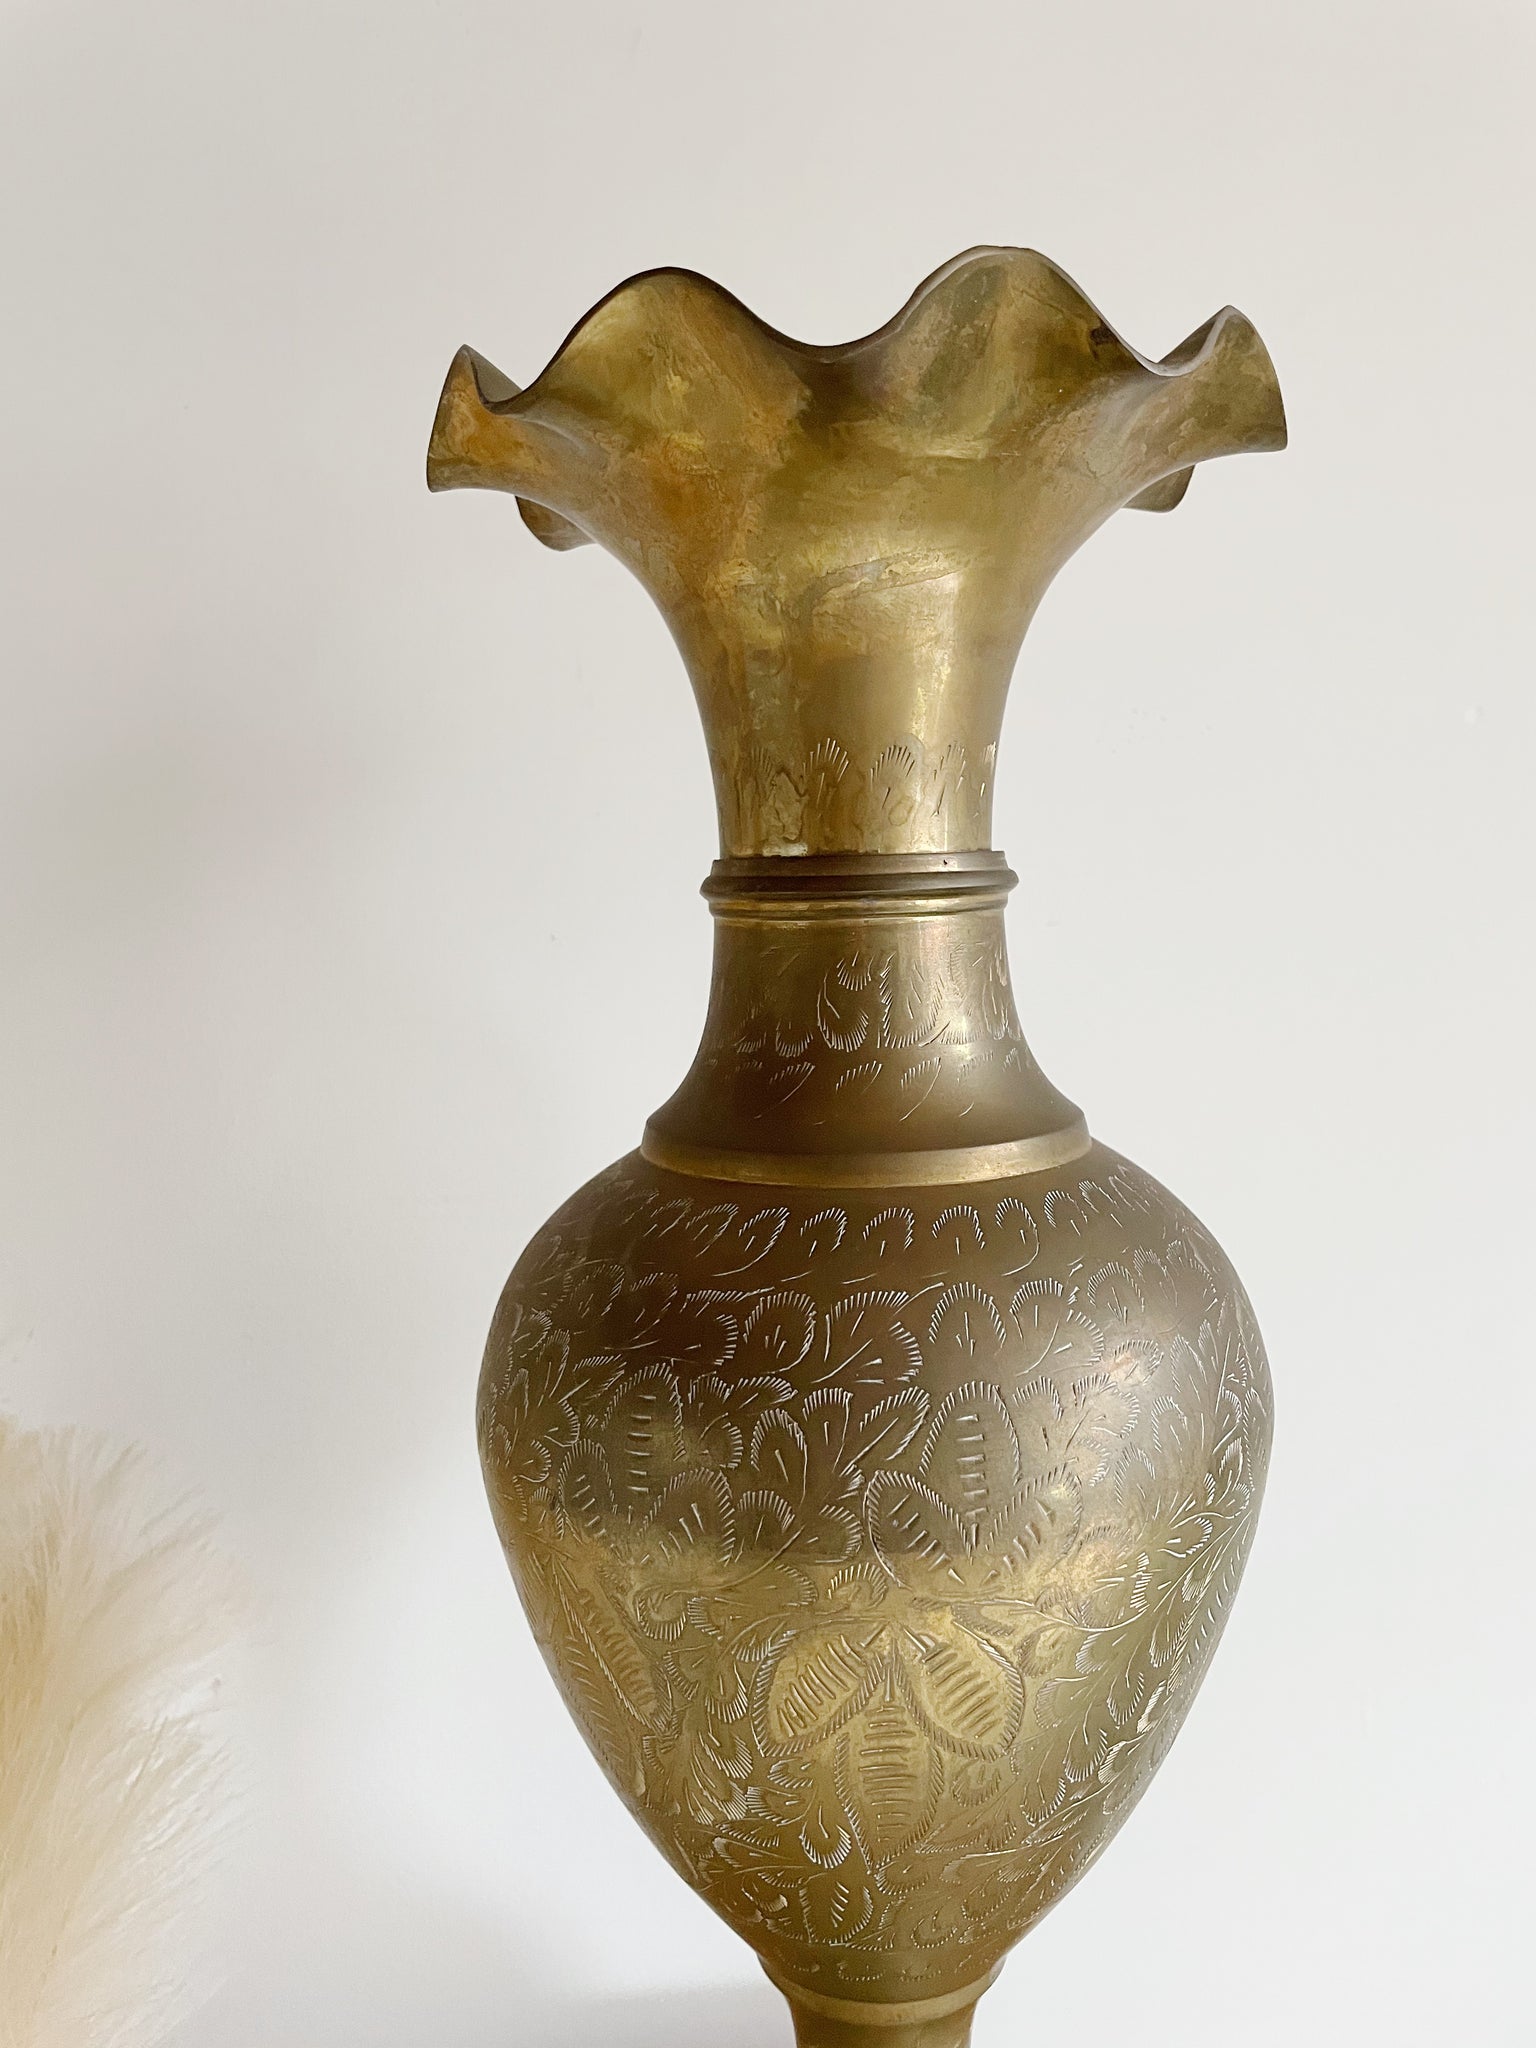 HK / UNKNOWN, Accents, Vintage Brass Etched Vase Made In India Marked Hk  2 Tall 13 Diam Polished